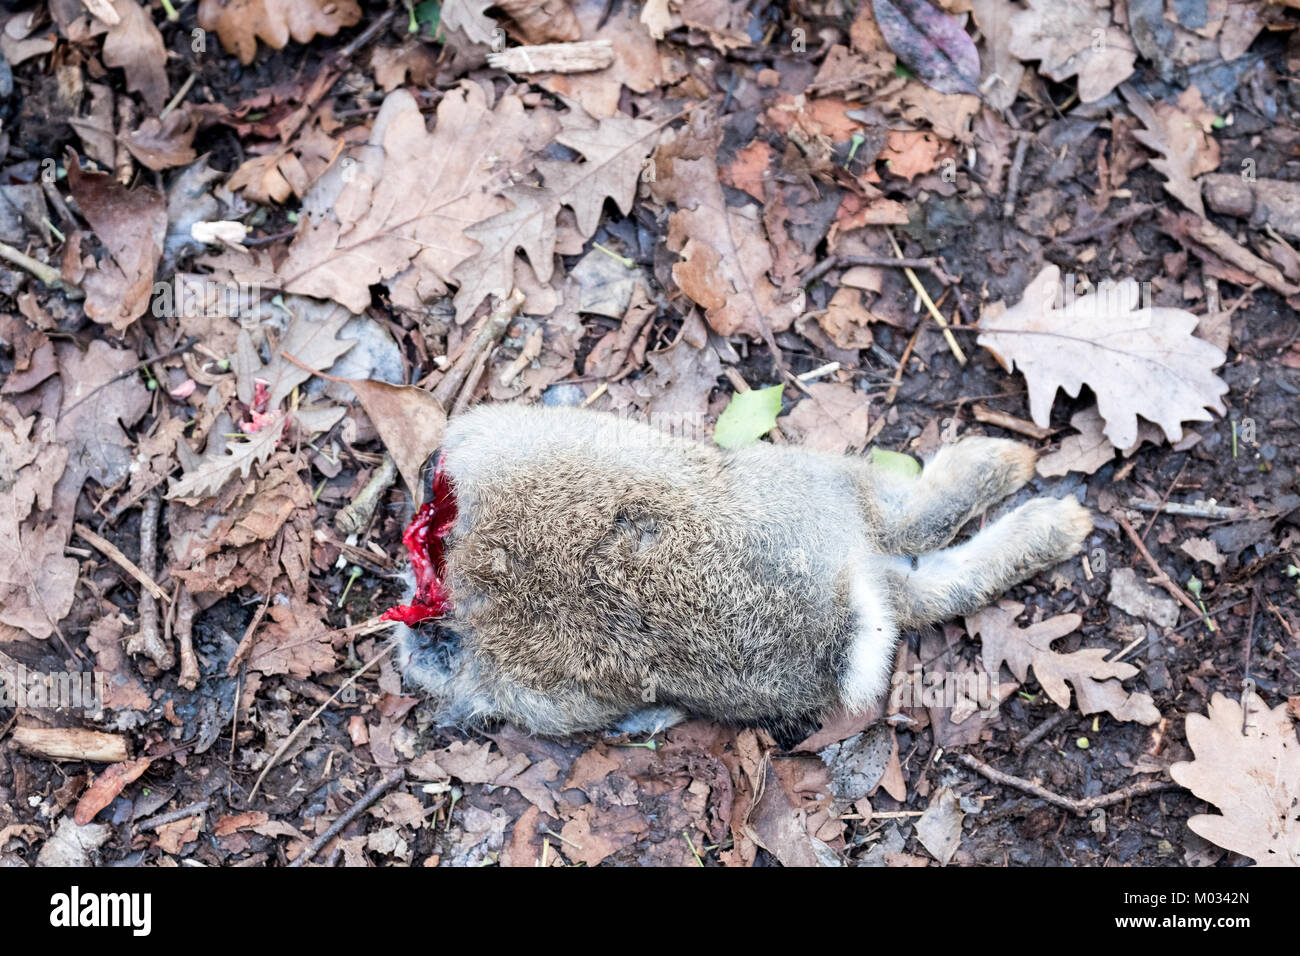 A partially eaten common rabbit, Oryctolagus cuniculus, abandoned by a fox lies on a woodland path. the picture shows the rear half of the wild rabbit Stock Photo